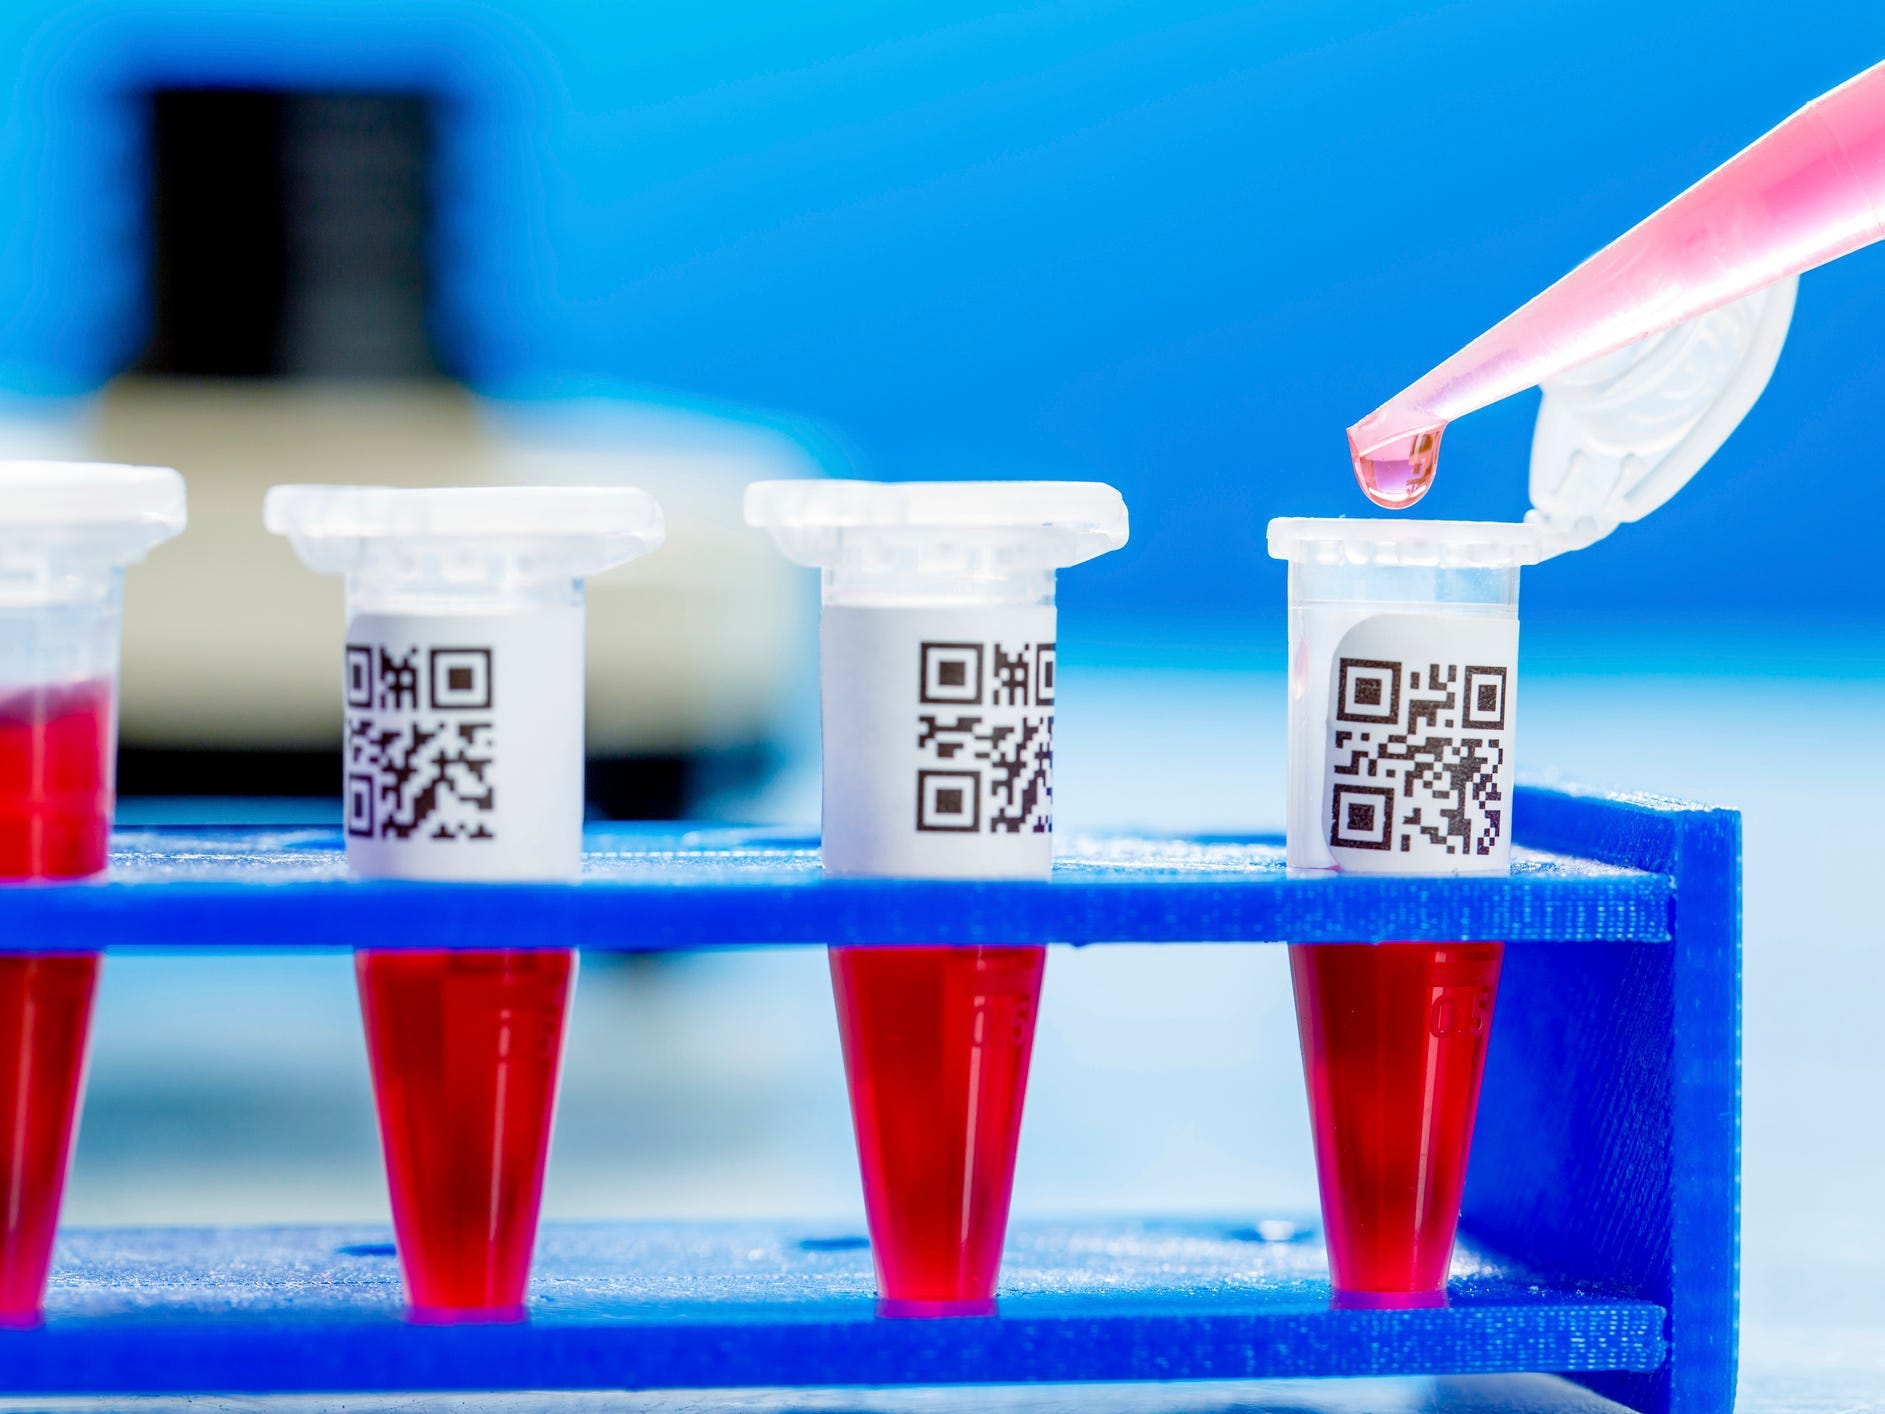 Eppendorf tubes with QR Codes